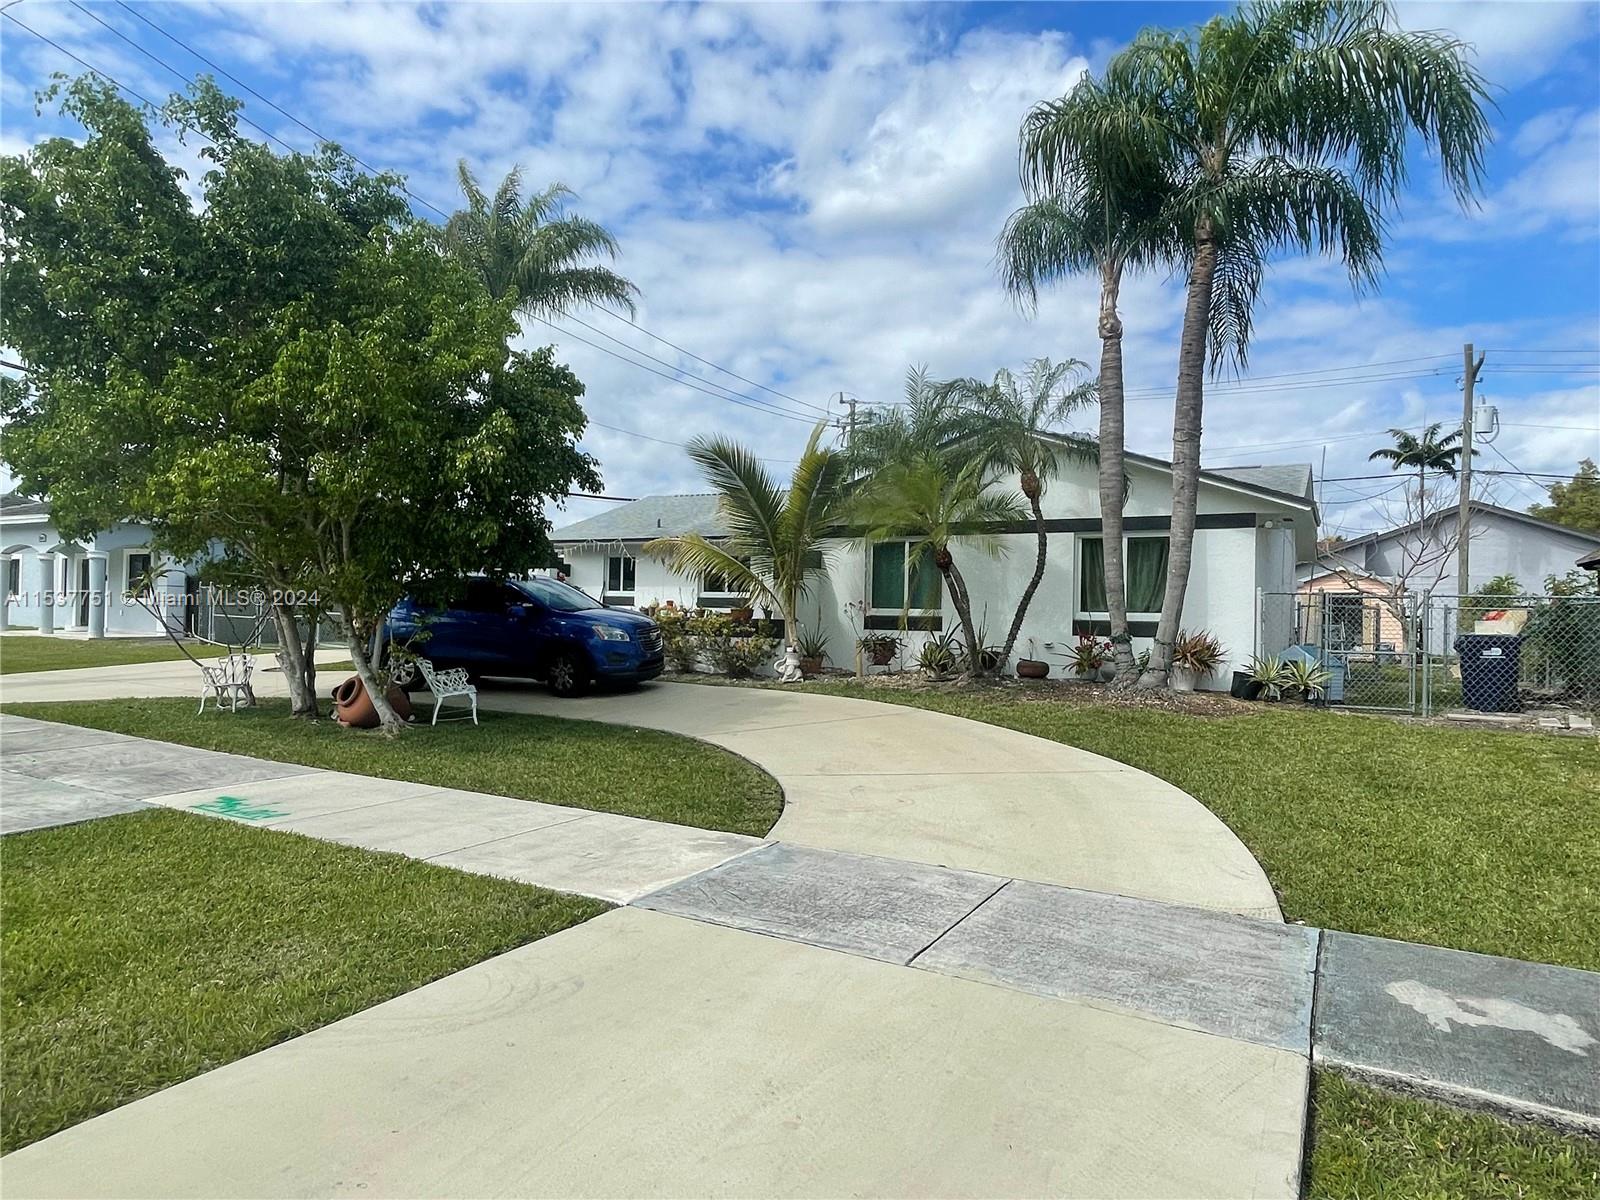 Welcome to your bew home!! Great opportunity for large family. Spacious three bedroom two bath house with lots of potentail in Cutler Bay. Large backyard for entertaining and barbequing. Entire back yard is fenced with chain link fence.  Large space with concrete slab on the side of the house for RV and/or boat parking.  Close to all shopping, dining, and easy access to the Florida Turnpike We will be showing house on Saturday, March 9th 12pm - 3pm. Do not disturb owners